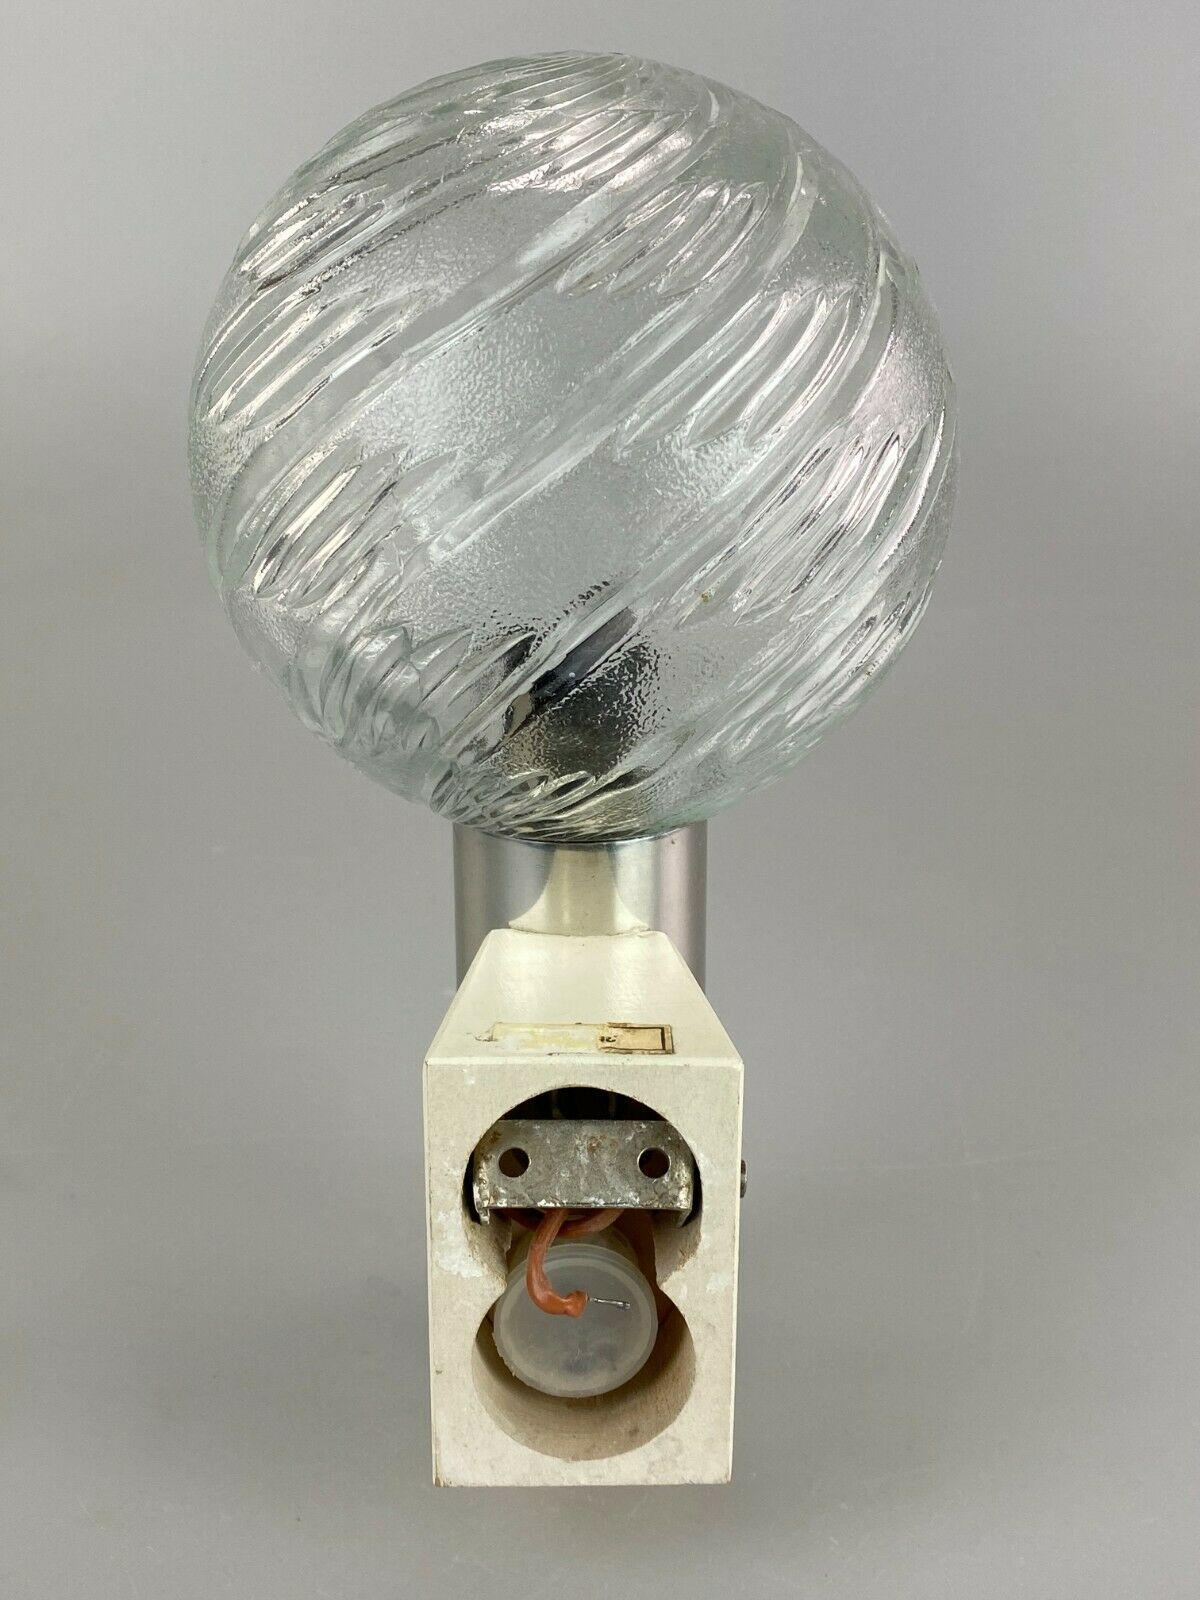 60s 70s Wall Lamp Ball Lamp Lamp Light Space Age Design For Sale 2